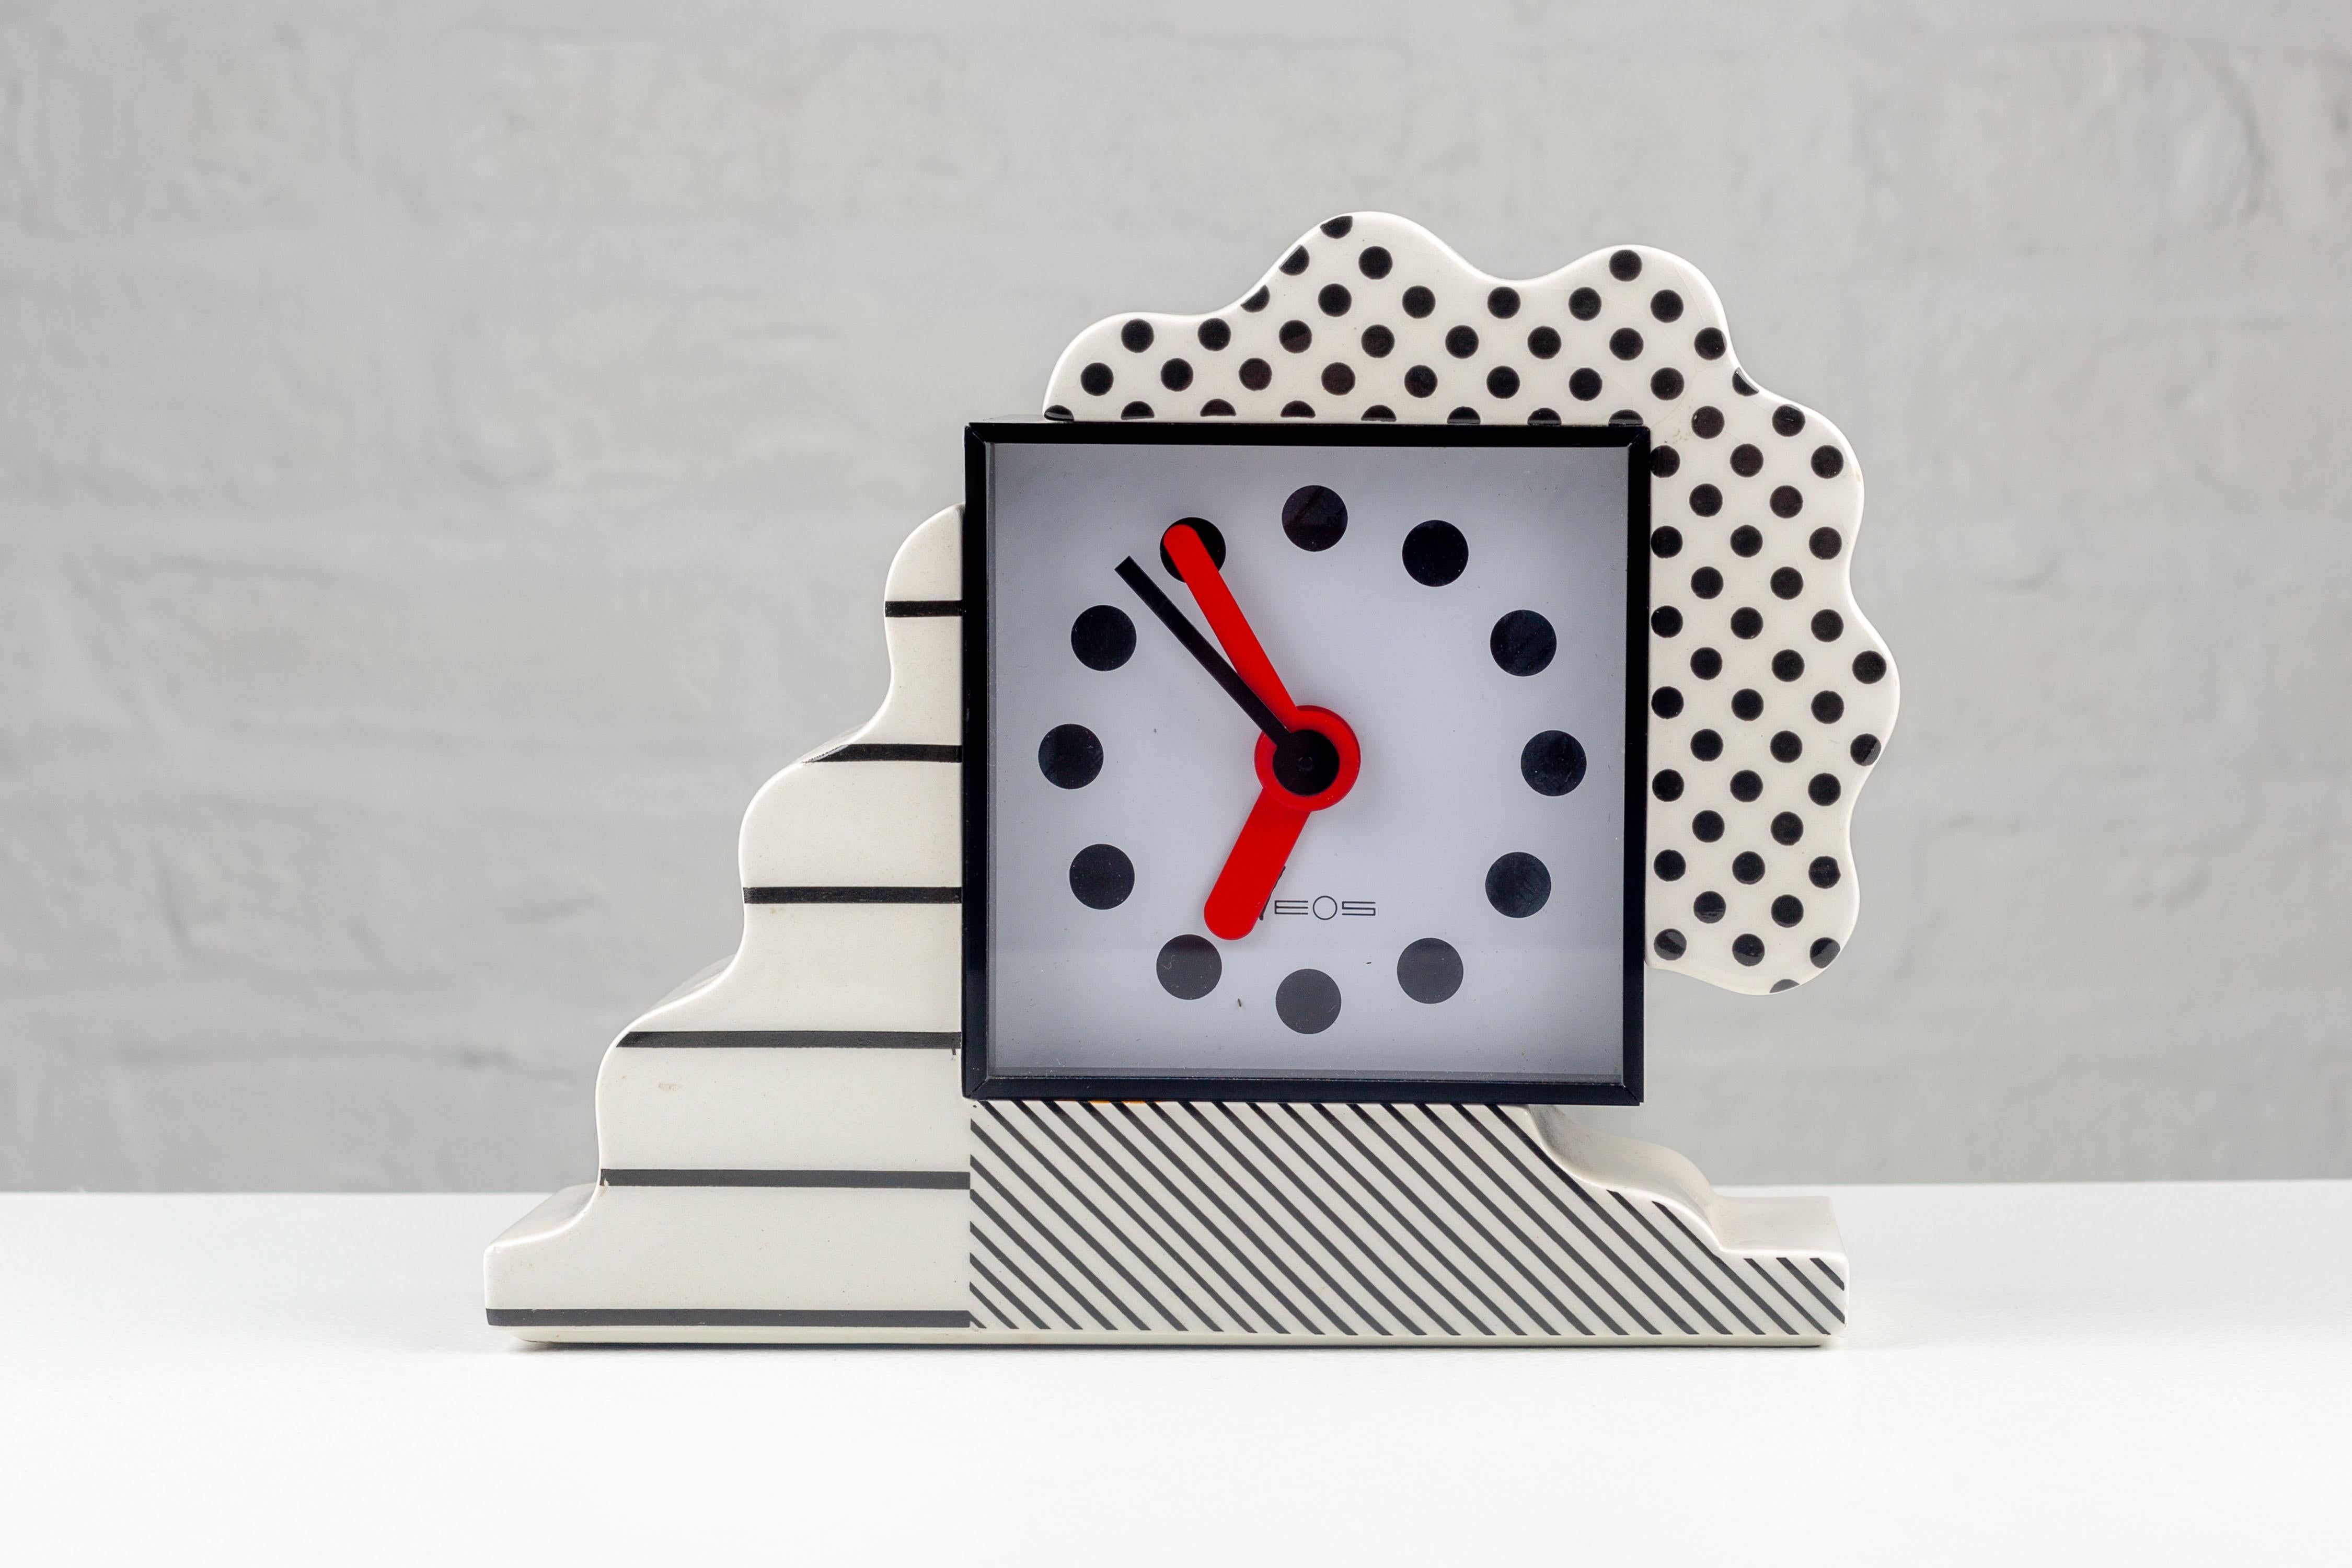 Created by Nathalie du Pasquier and George Sowden for Neos Lorenz in 1988 Italy, this ceramic table clock, with its bold shapes and patterns, is an excellent example of 1980s design.

The porcelain is crafted by Alessio Sarri, renowned for his